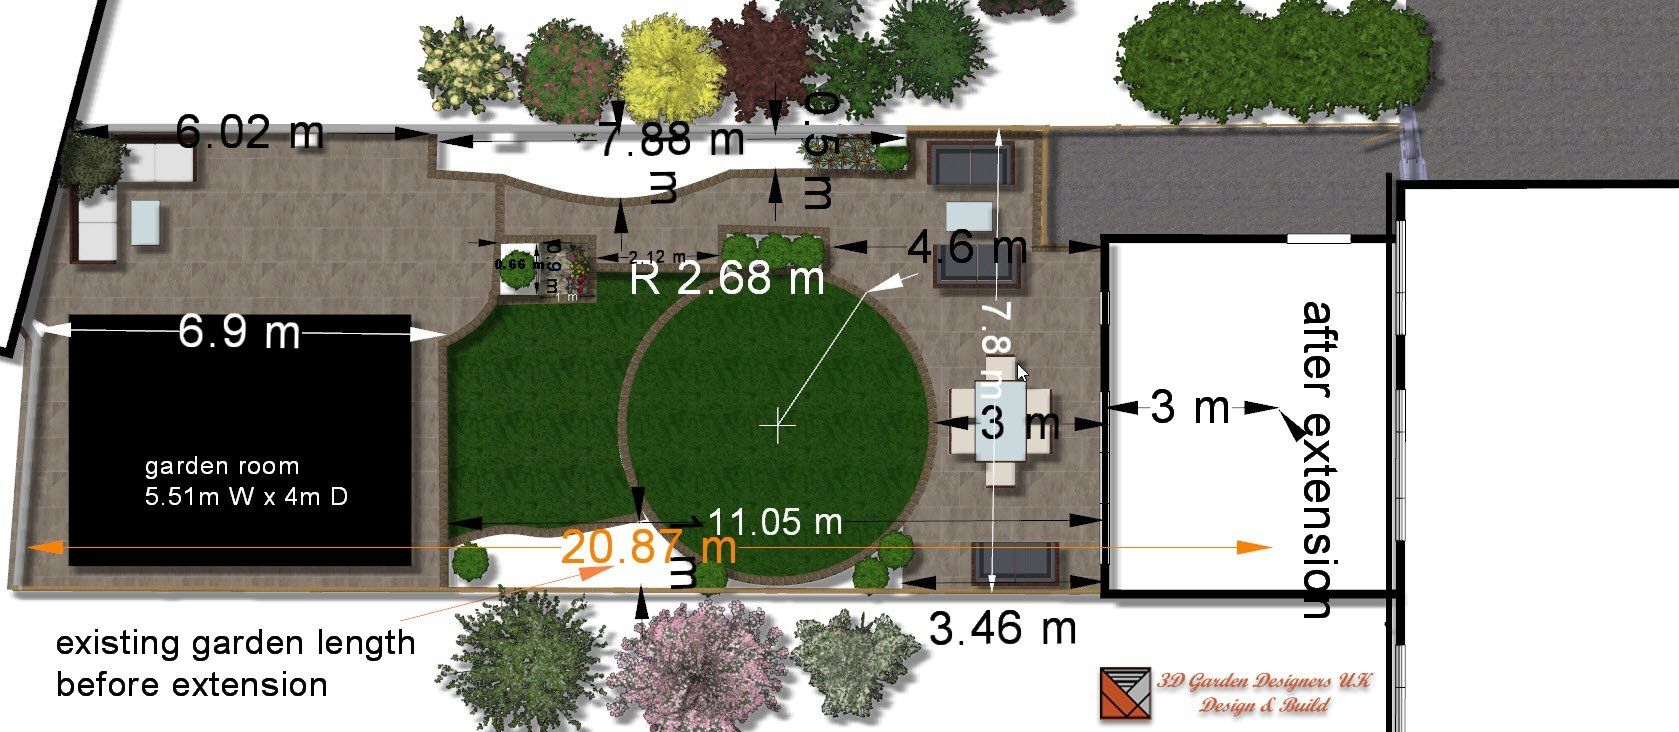 garden plan with dimensions